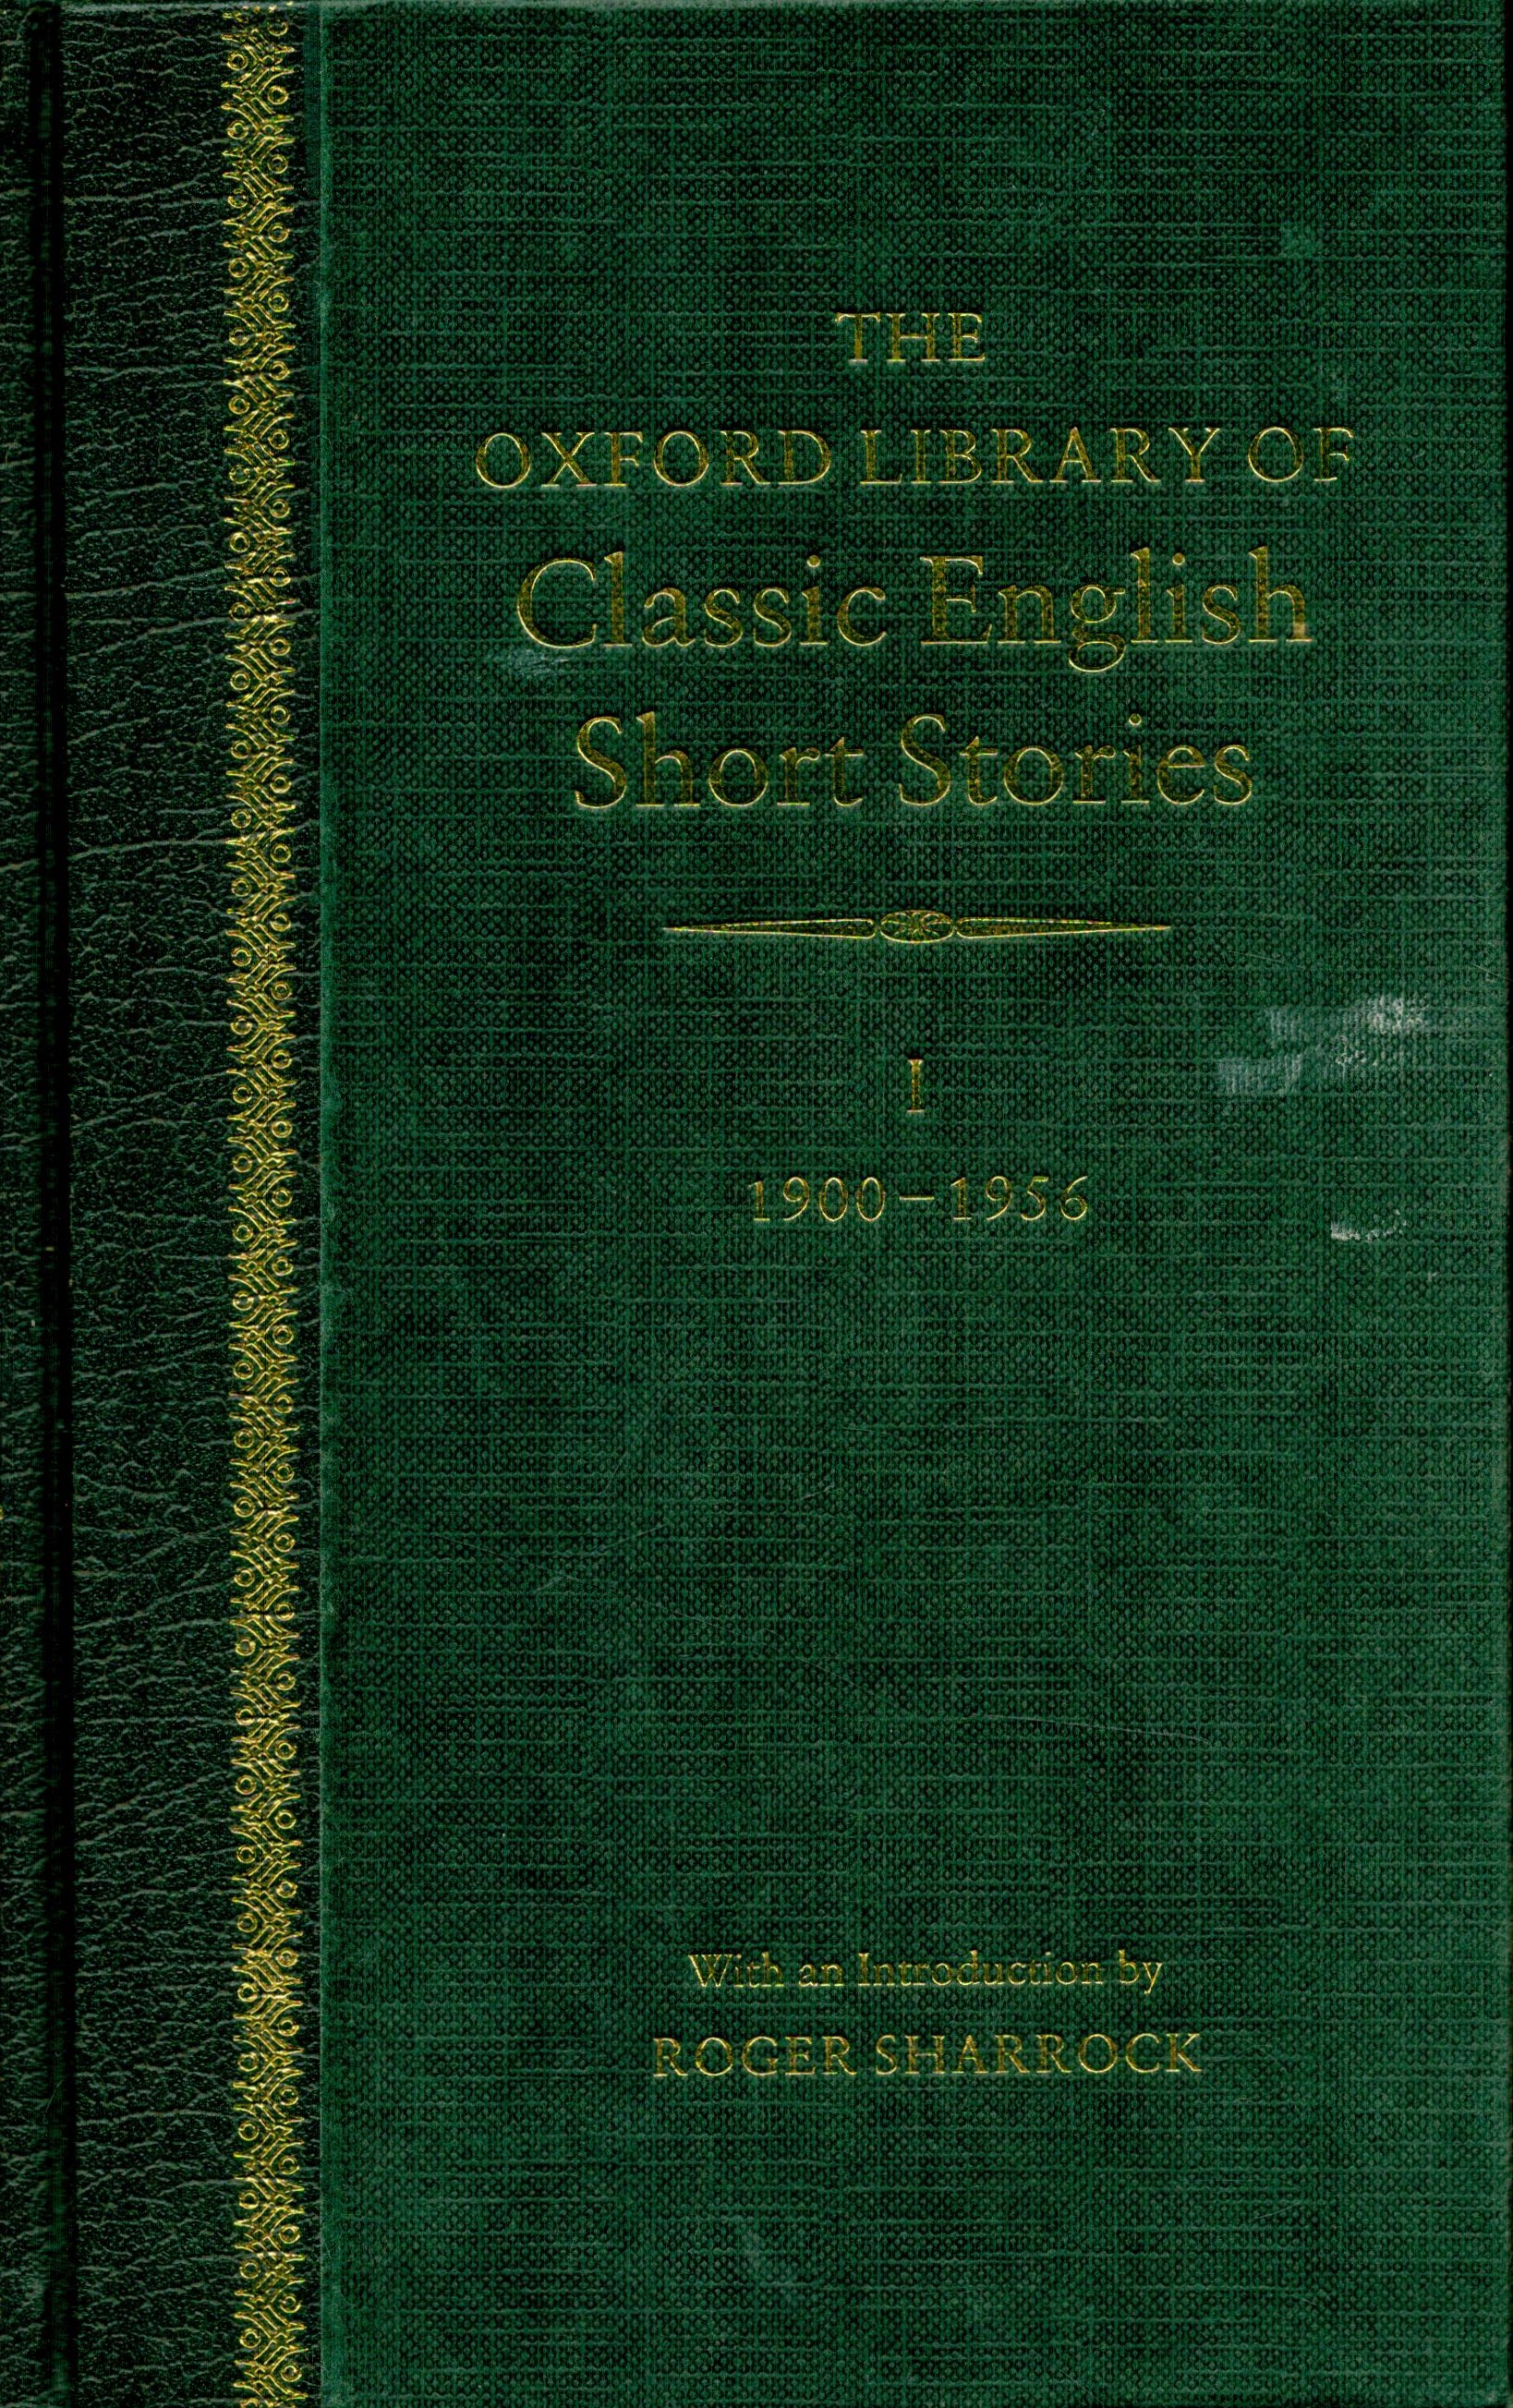 Oxford Library of Classic English Short Stories vols 1 and 2 in Slipcase 1989 edition unknown - Image 2 of 4